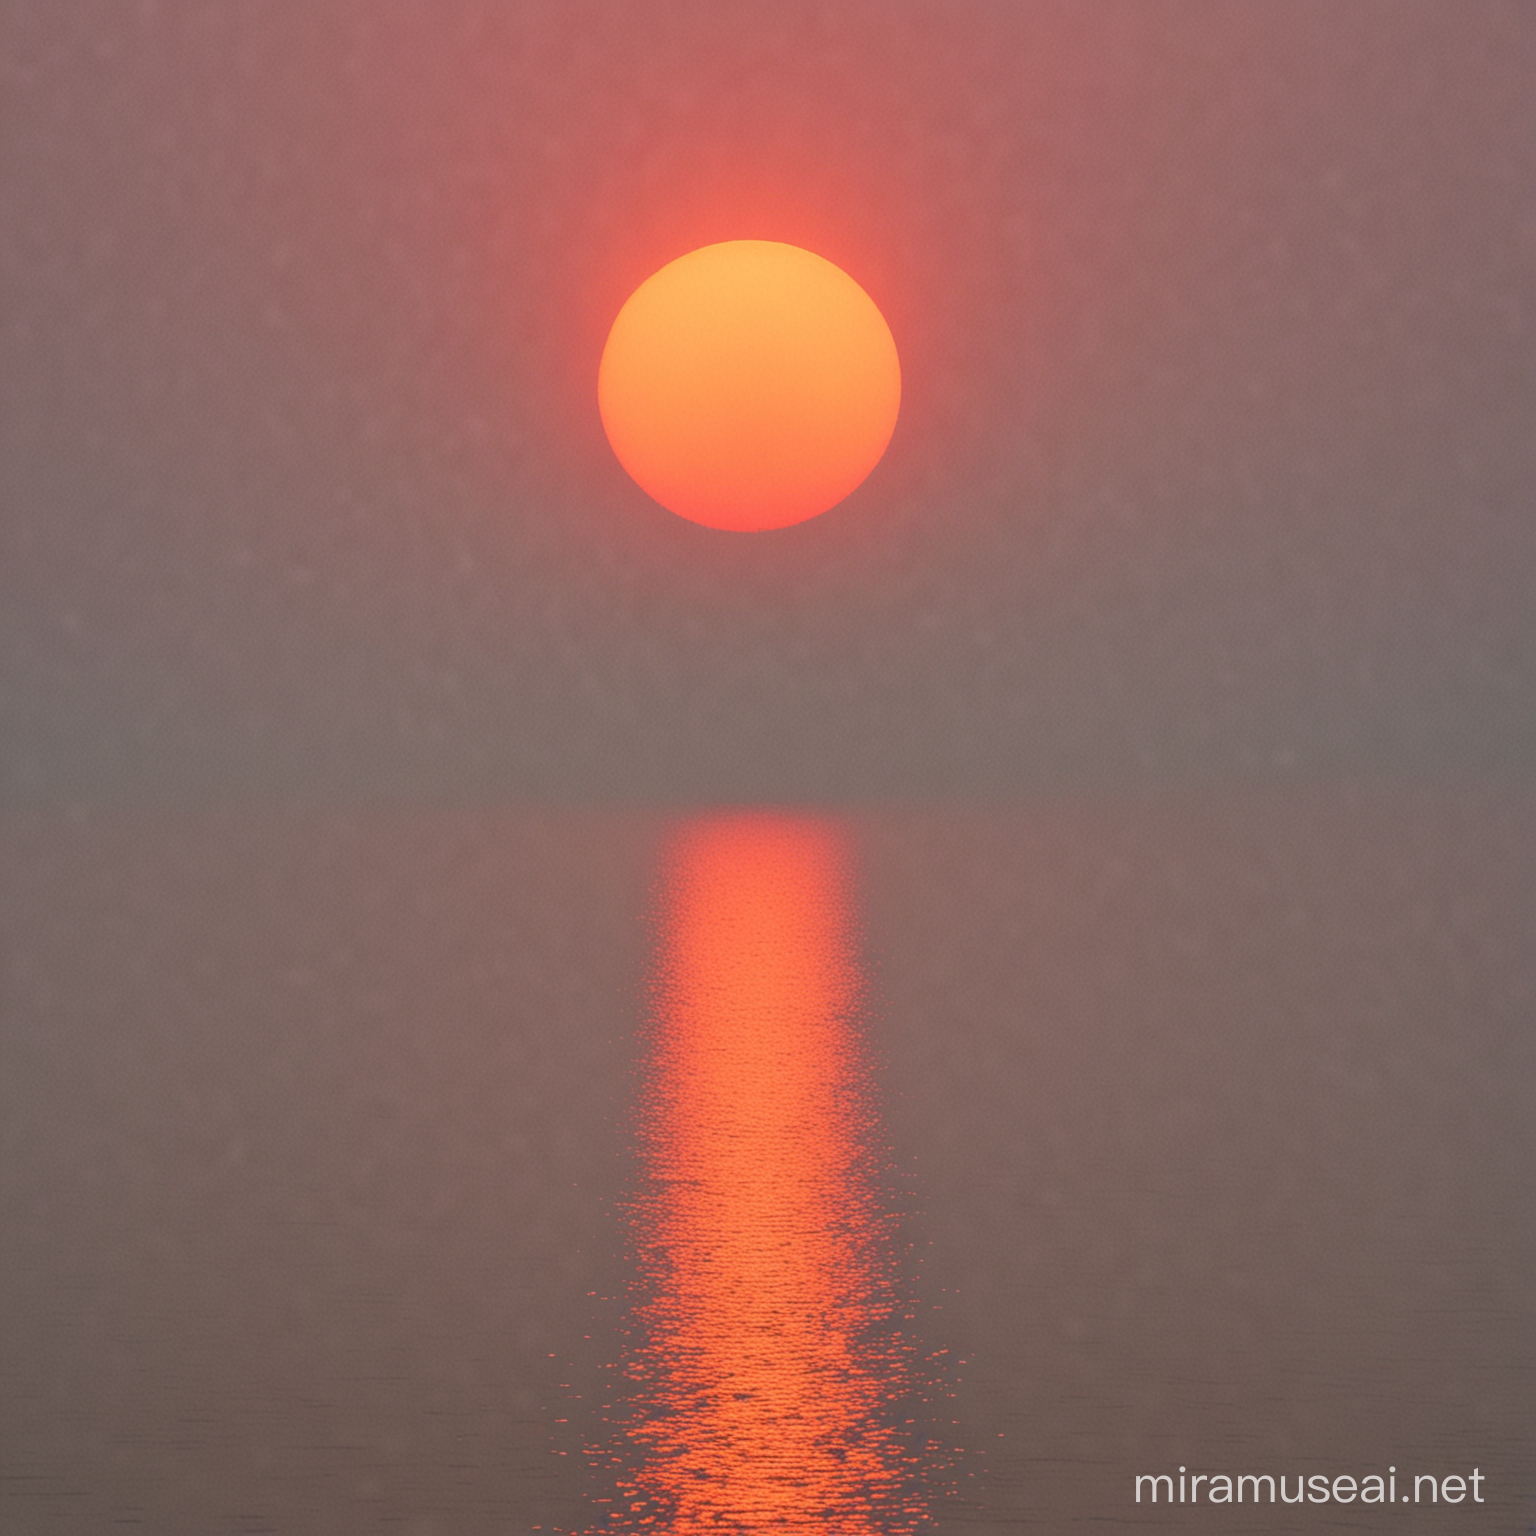 A setting red and gold sun partially obscured by a misty atmosphere 